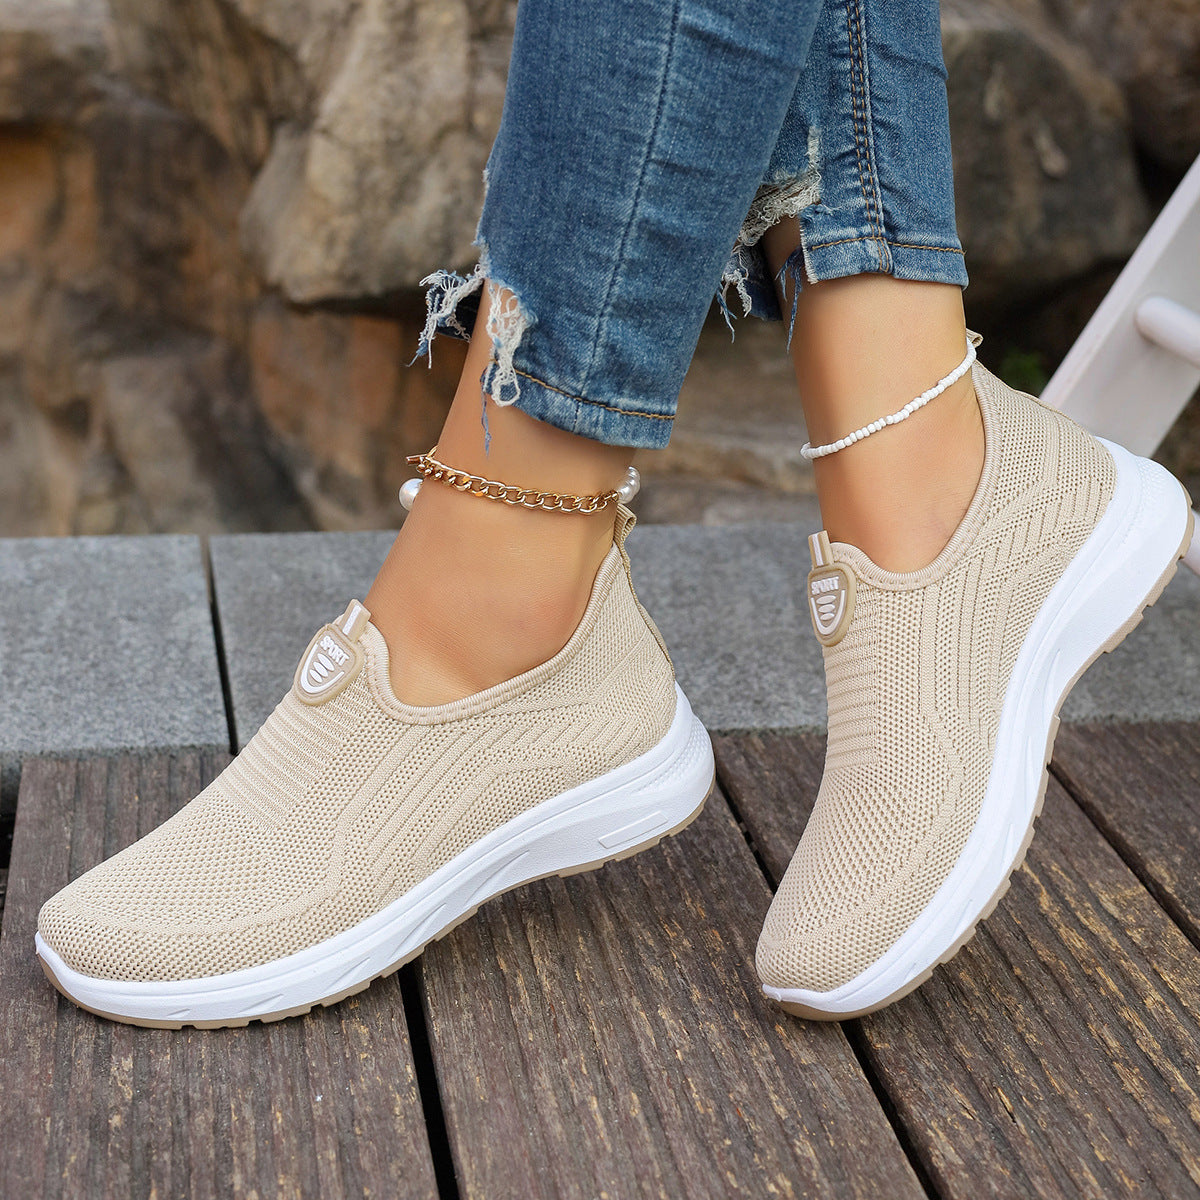 Women's Soft Bottom Slip-on Flyknit Breathable Casual Shoes